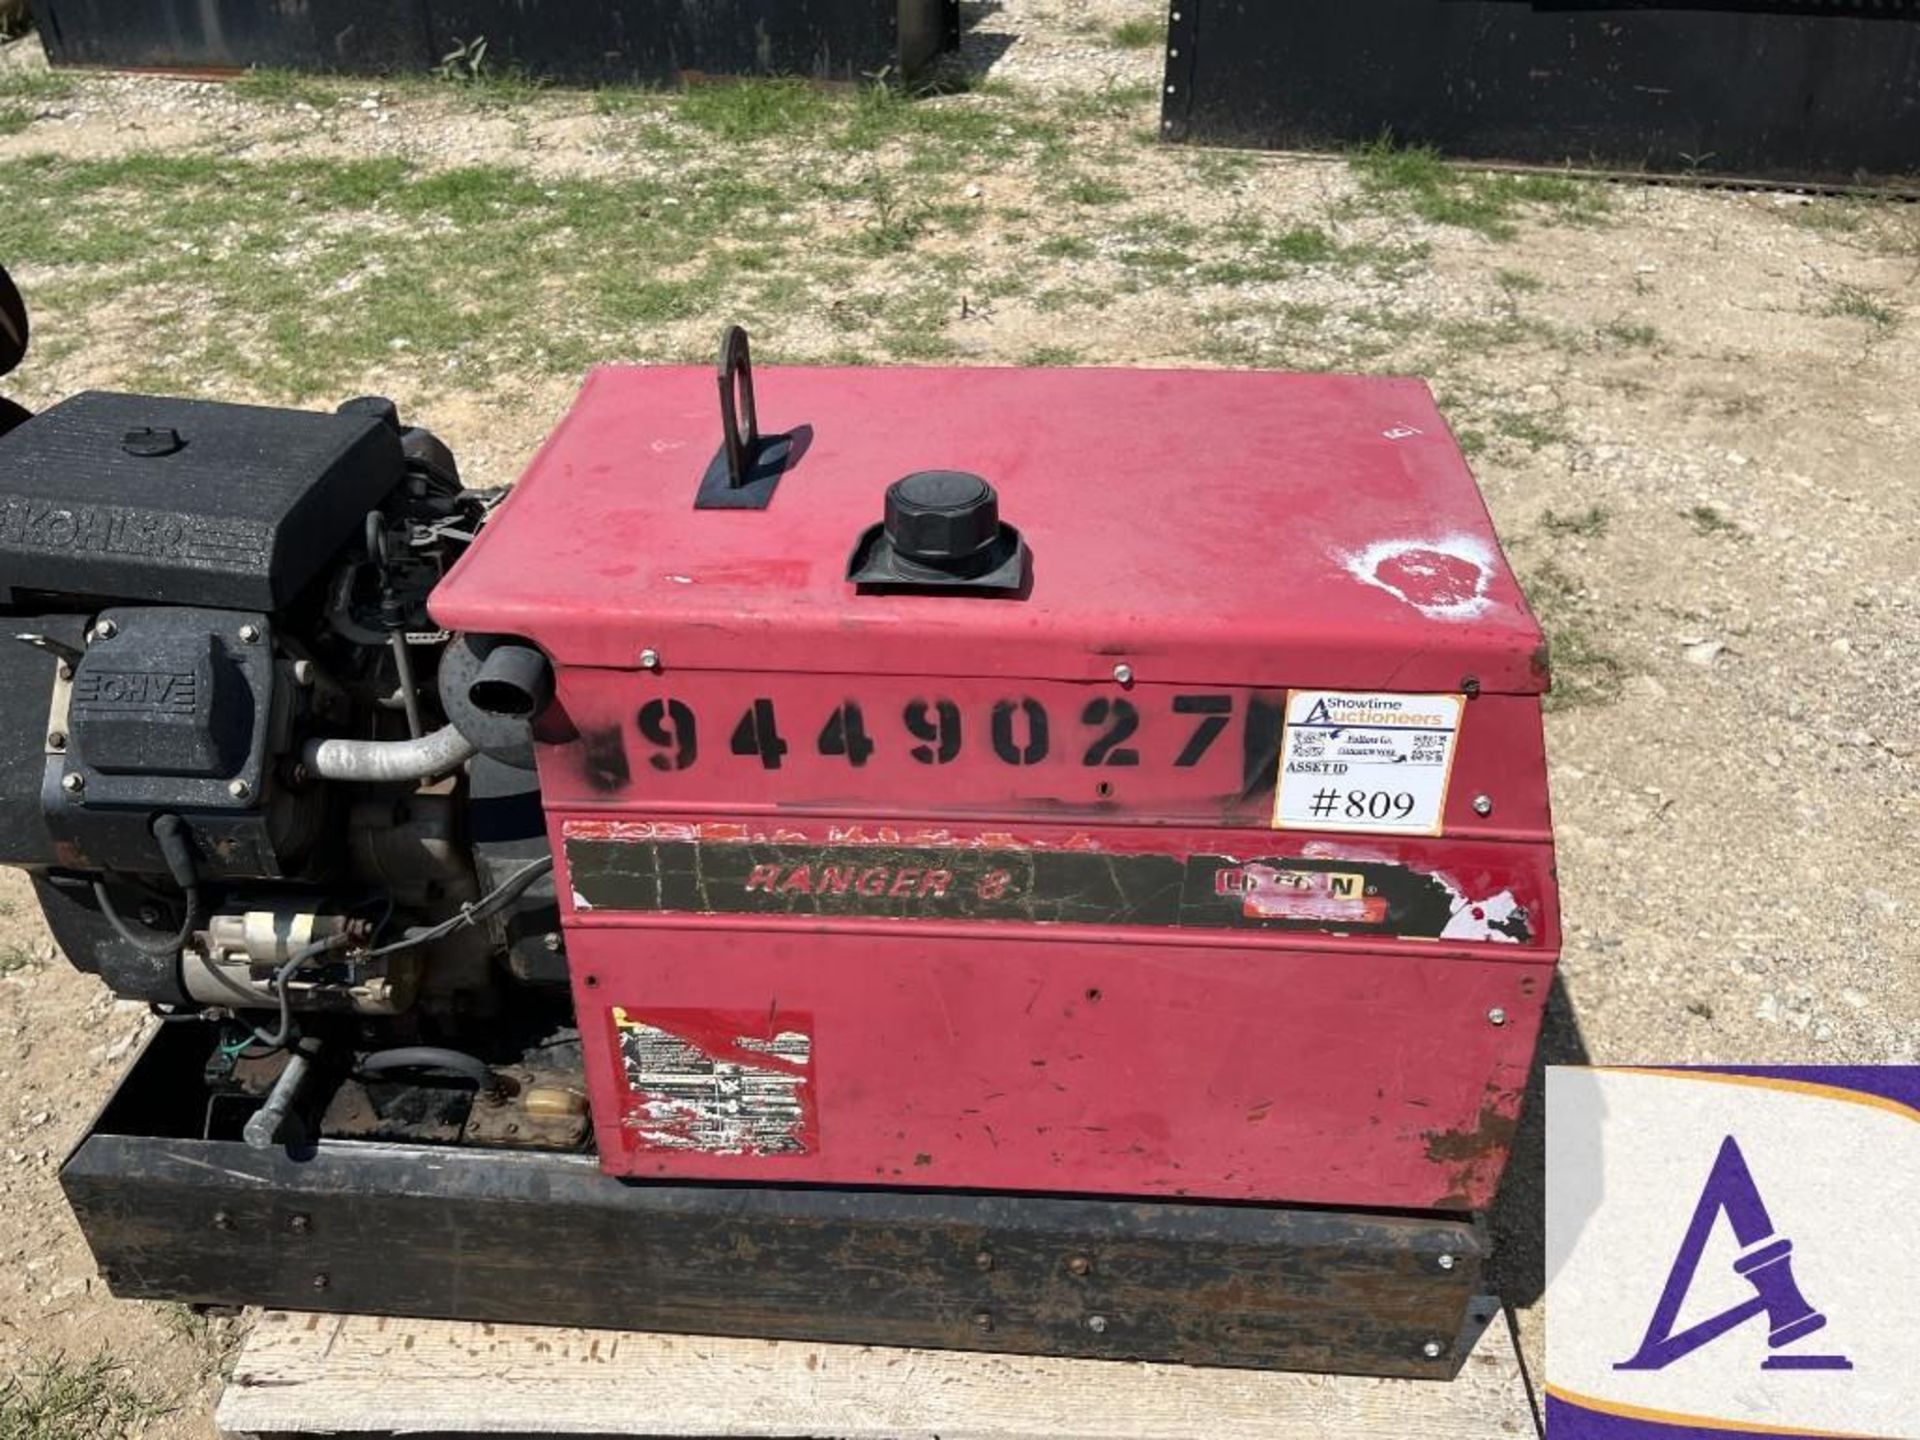 Lincoln Electric Ranger 8 AC/DC Welding Machine - Image 10 of 10